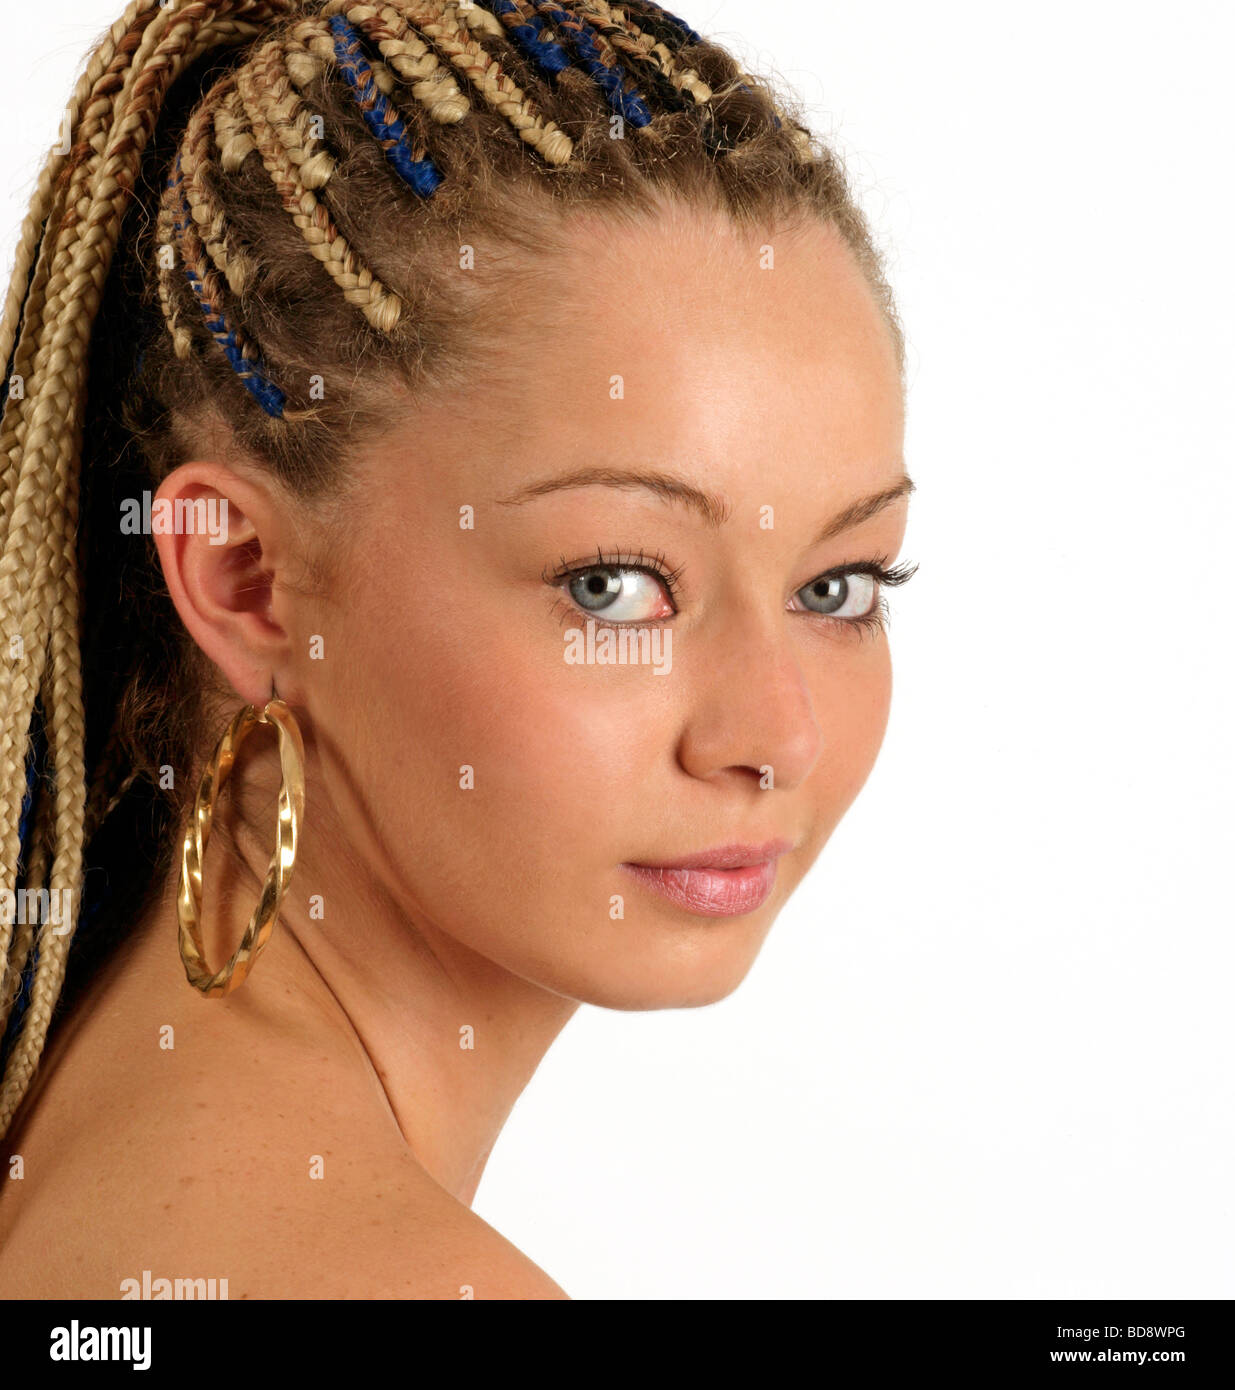 young woman with cat like eyes and braids in her hair Stock Photo